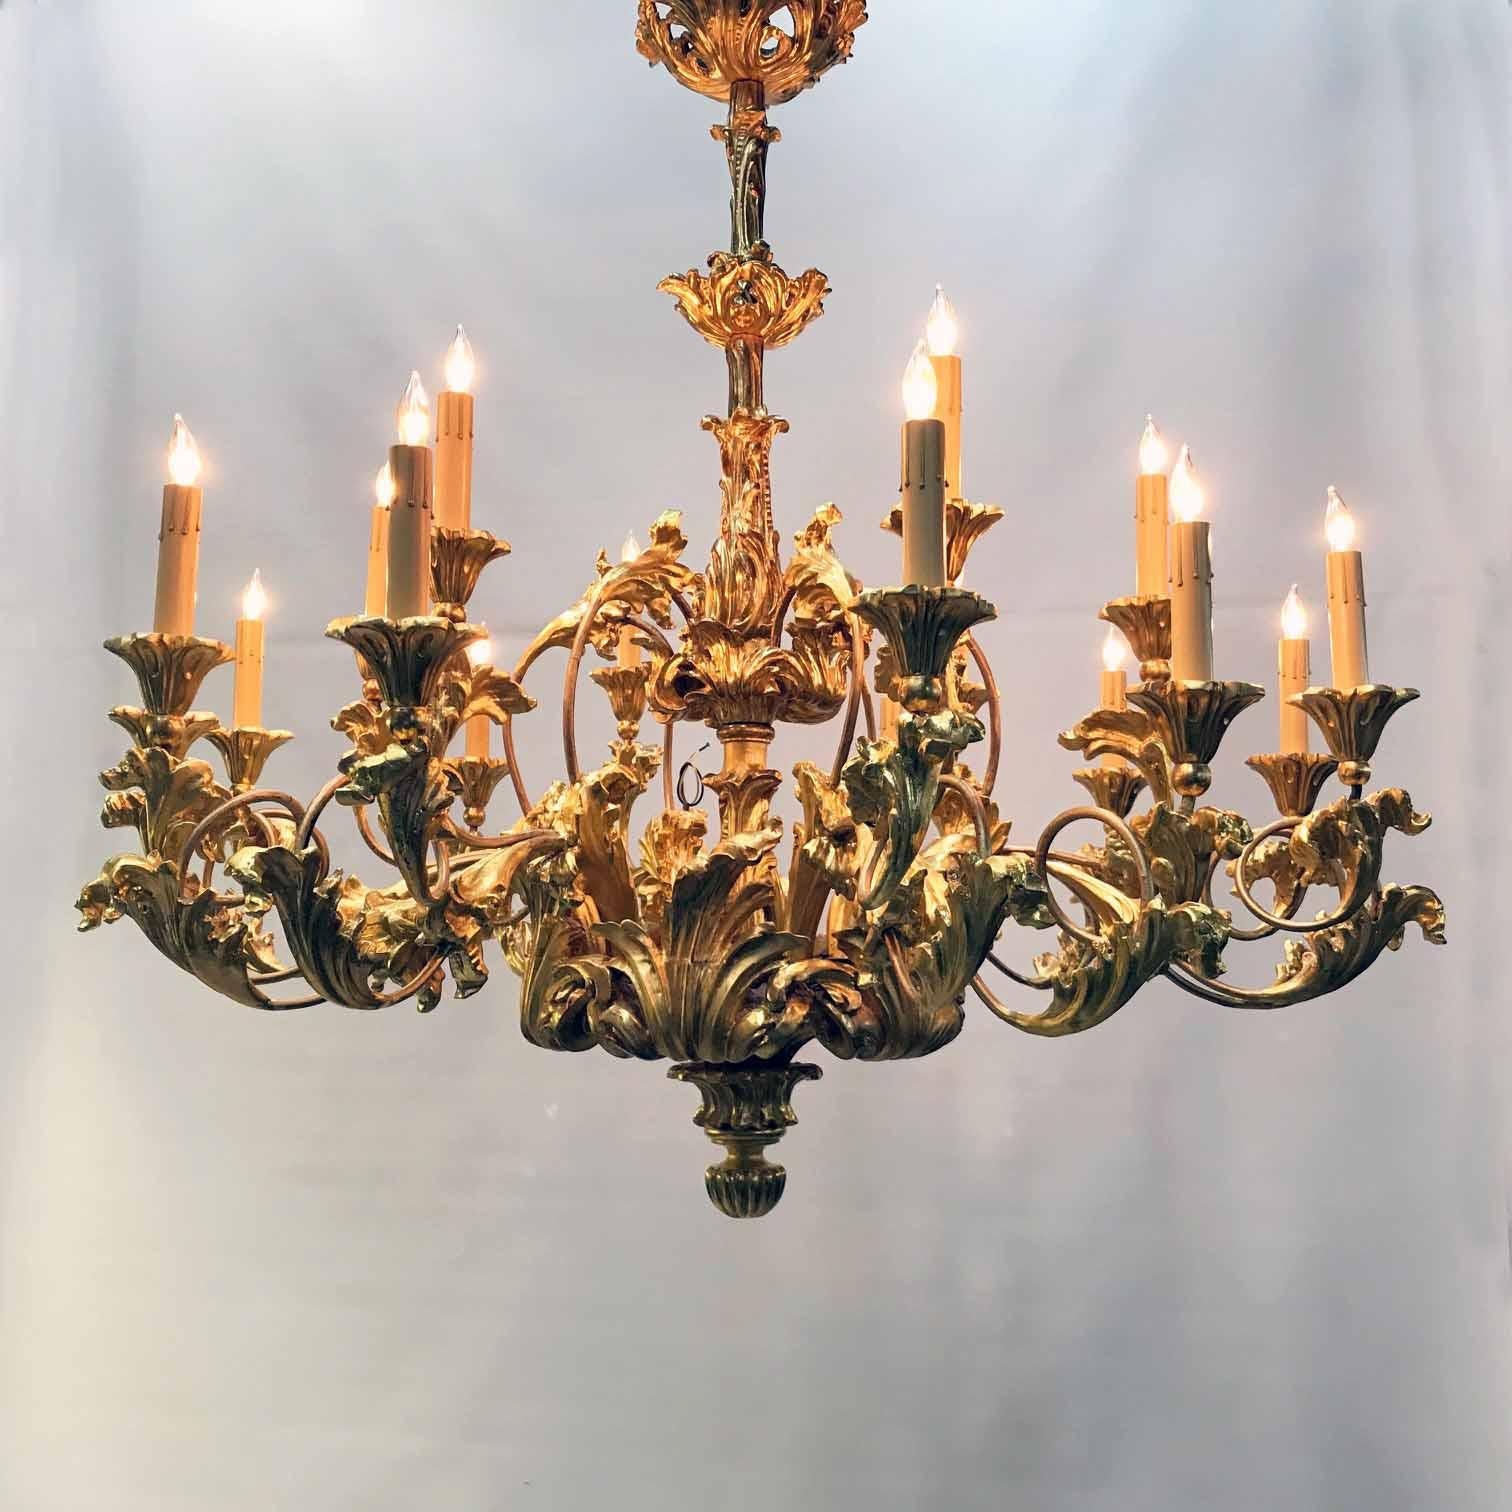 This sumptuous fixture has a pleasingly organic theme. It is essentially composed of elegantly shaped tubular arms, richly adorned with carved and gilded acanthus leaves. It is large and imposing but also has a naturalistic aspect. While probably